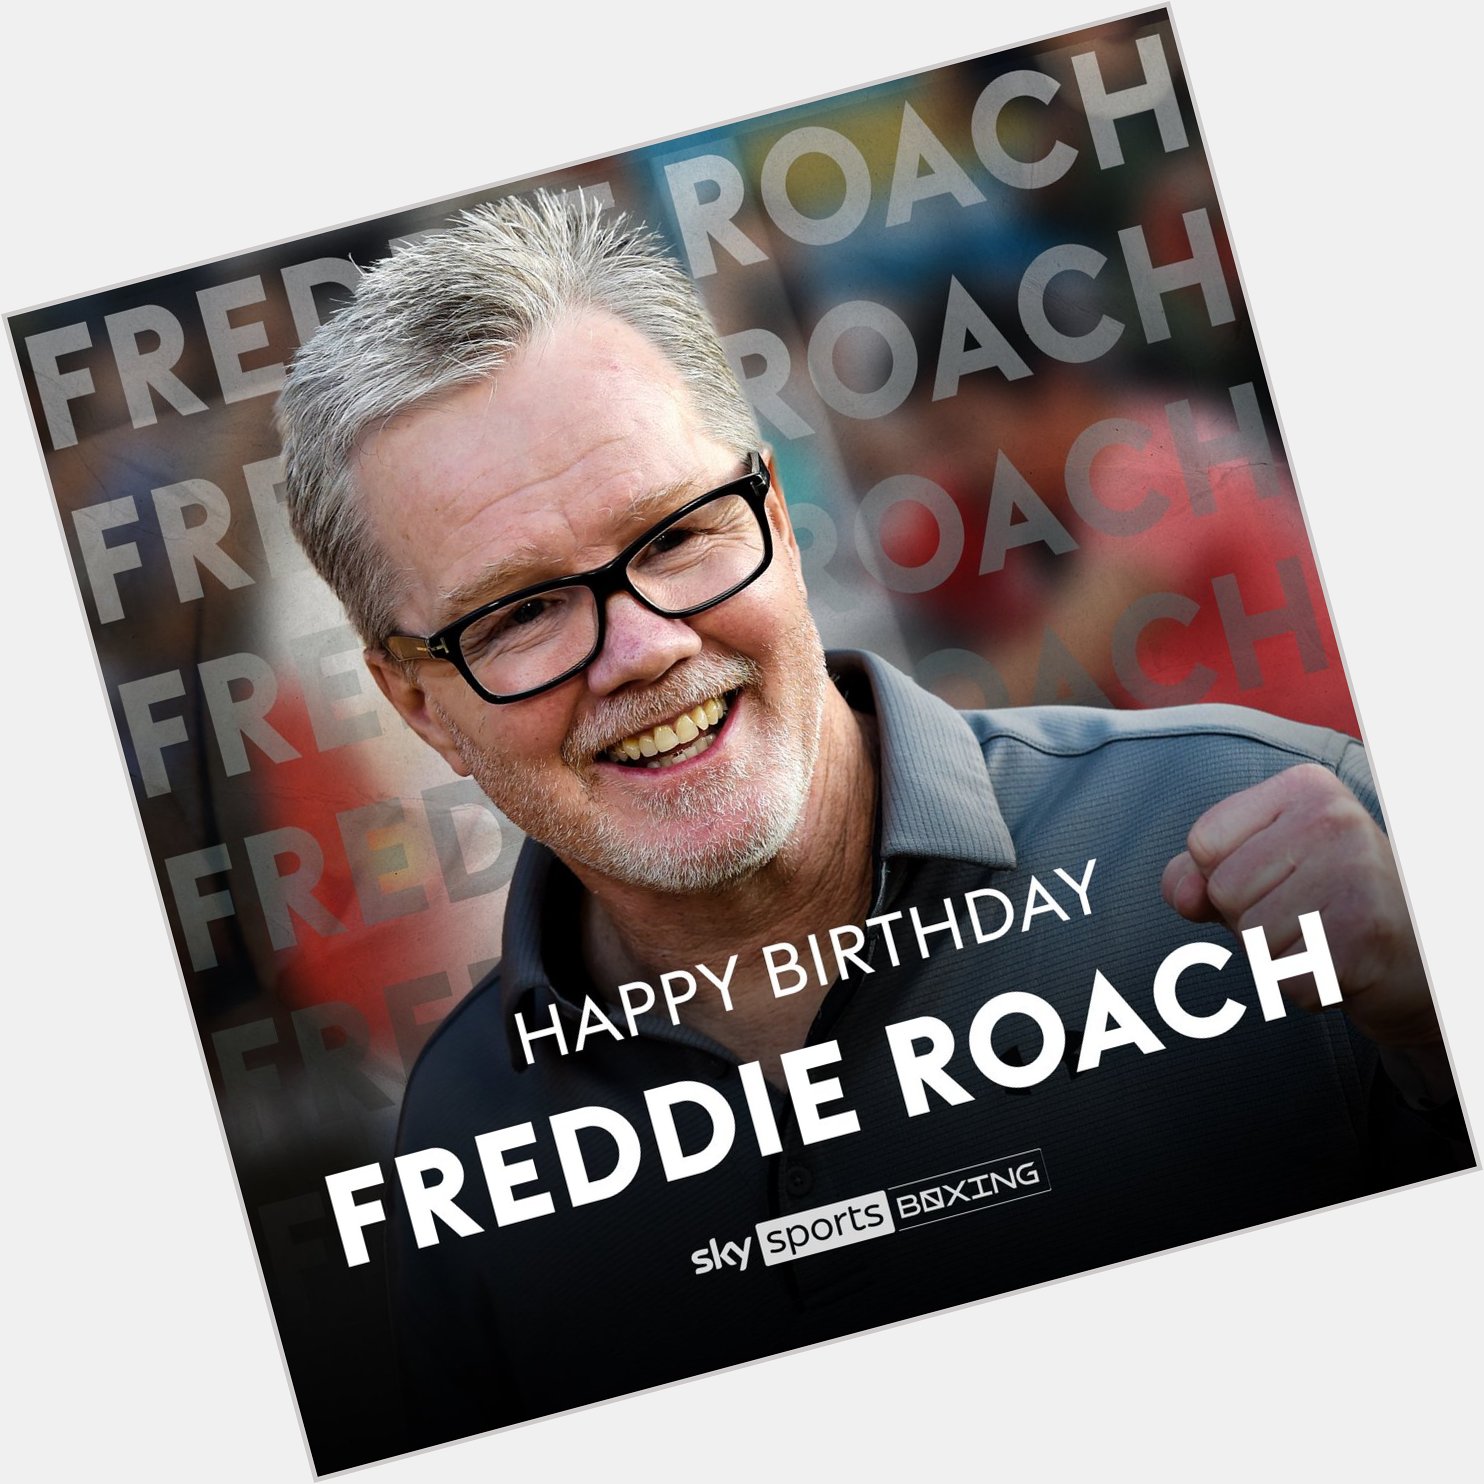    Happy birthday to the Hall of Fame legend, Freddie Roach    